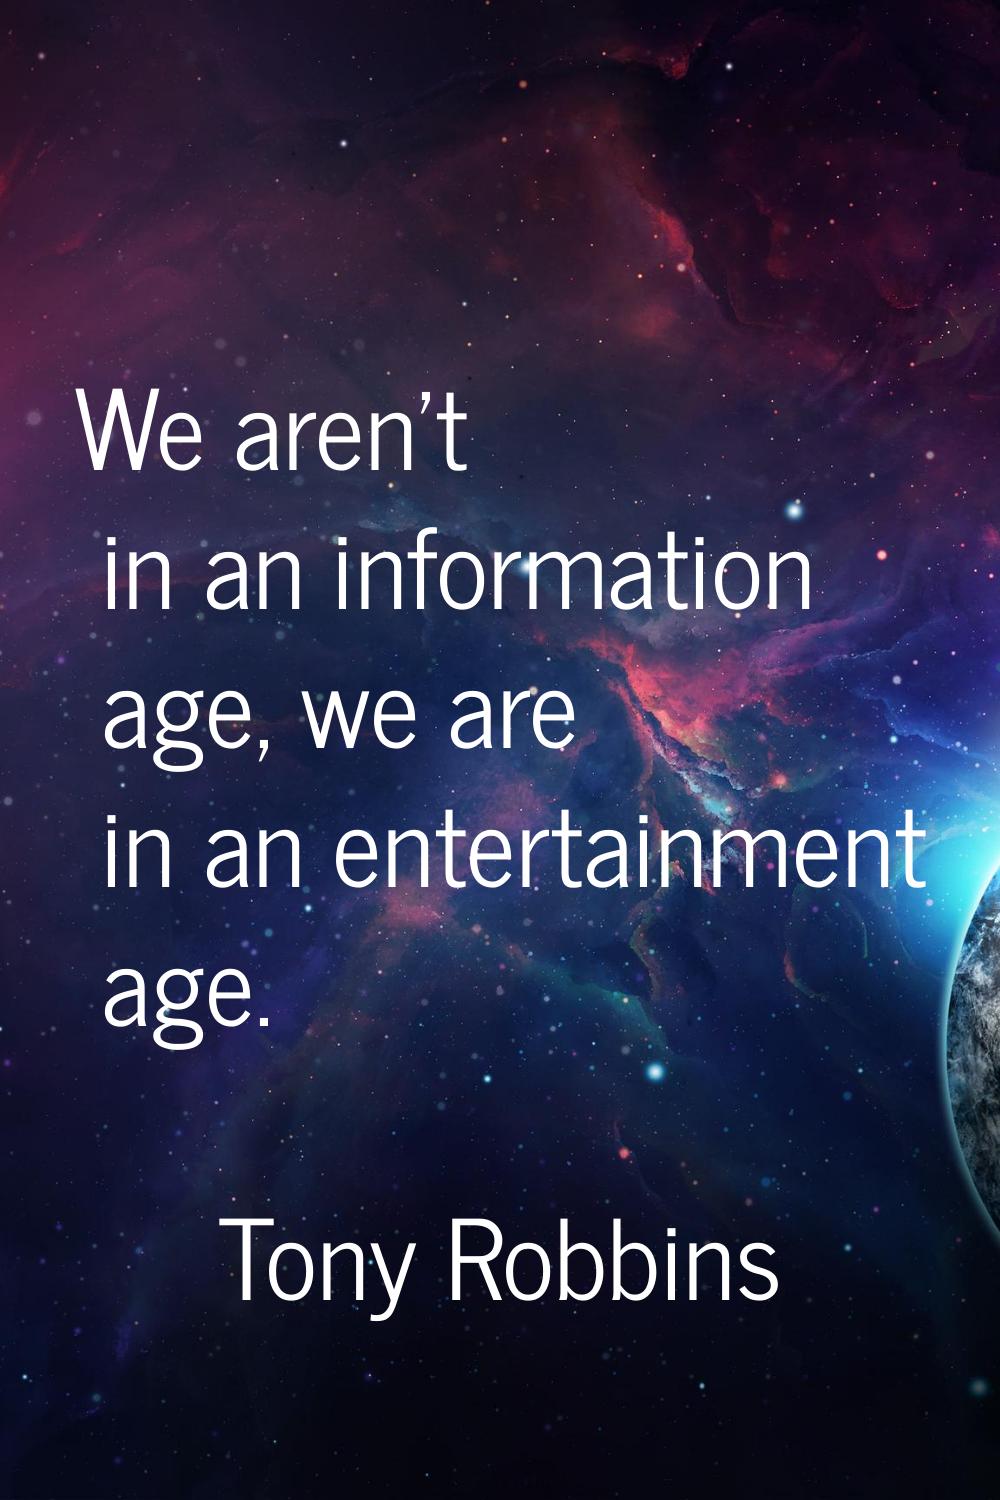 We aren't in an information age, we are in an entertainment age.